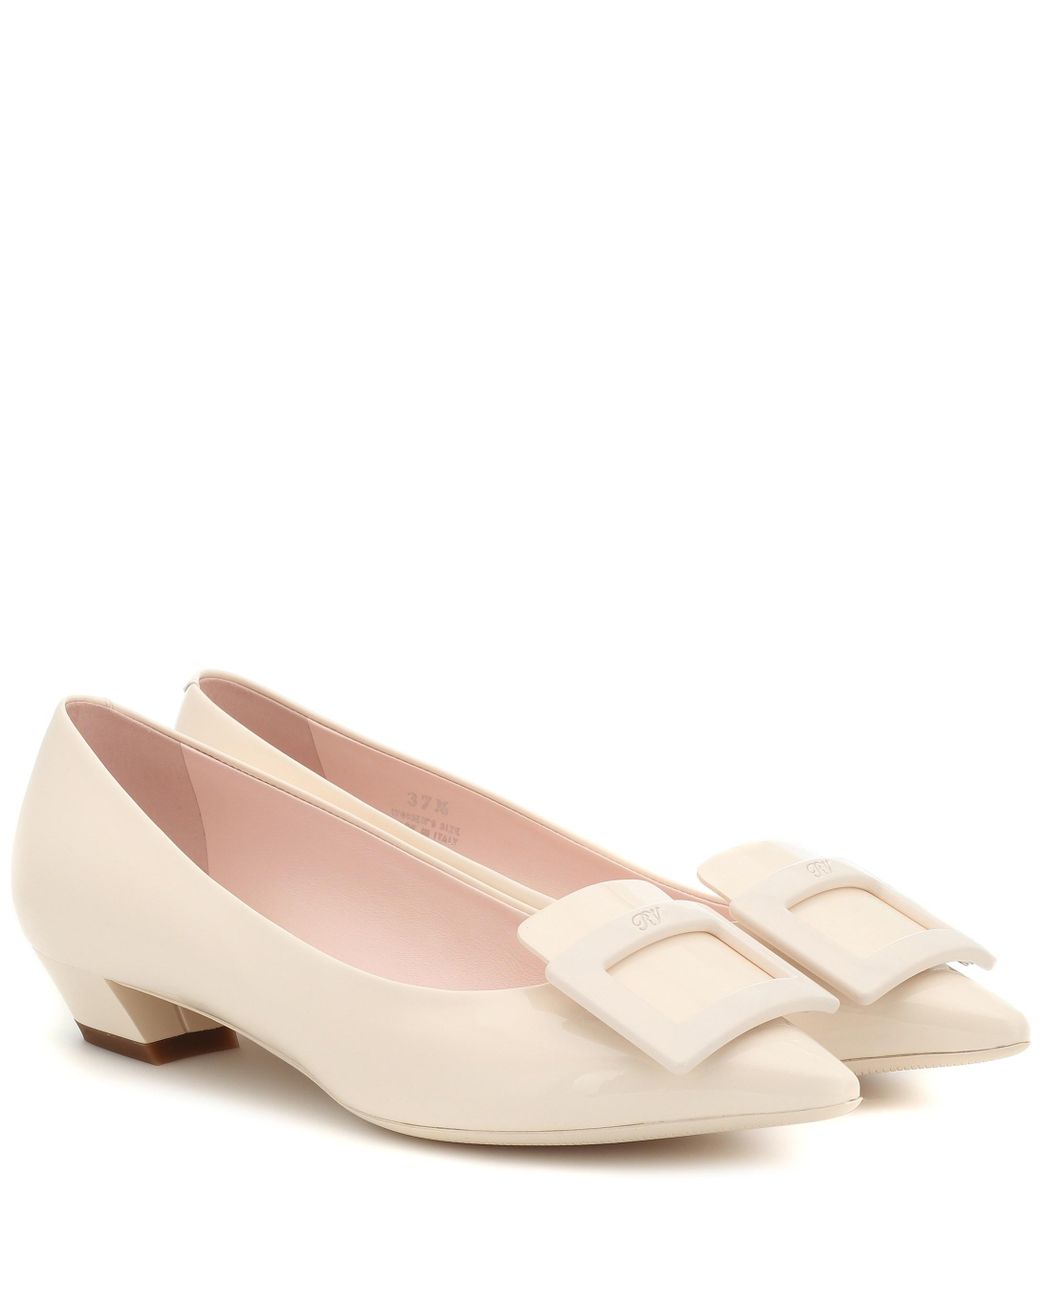 Roger Vivier Gommetine Leather Ballet Flats in White - Lyst